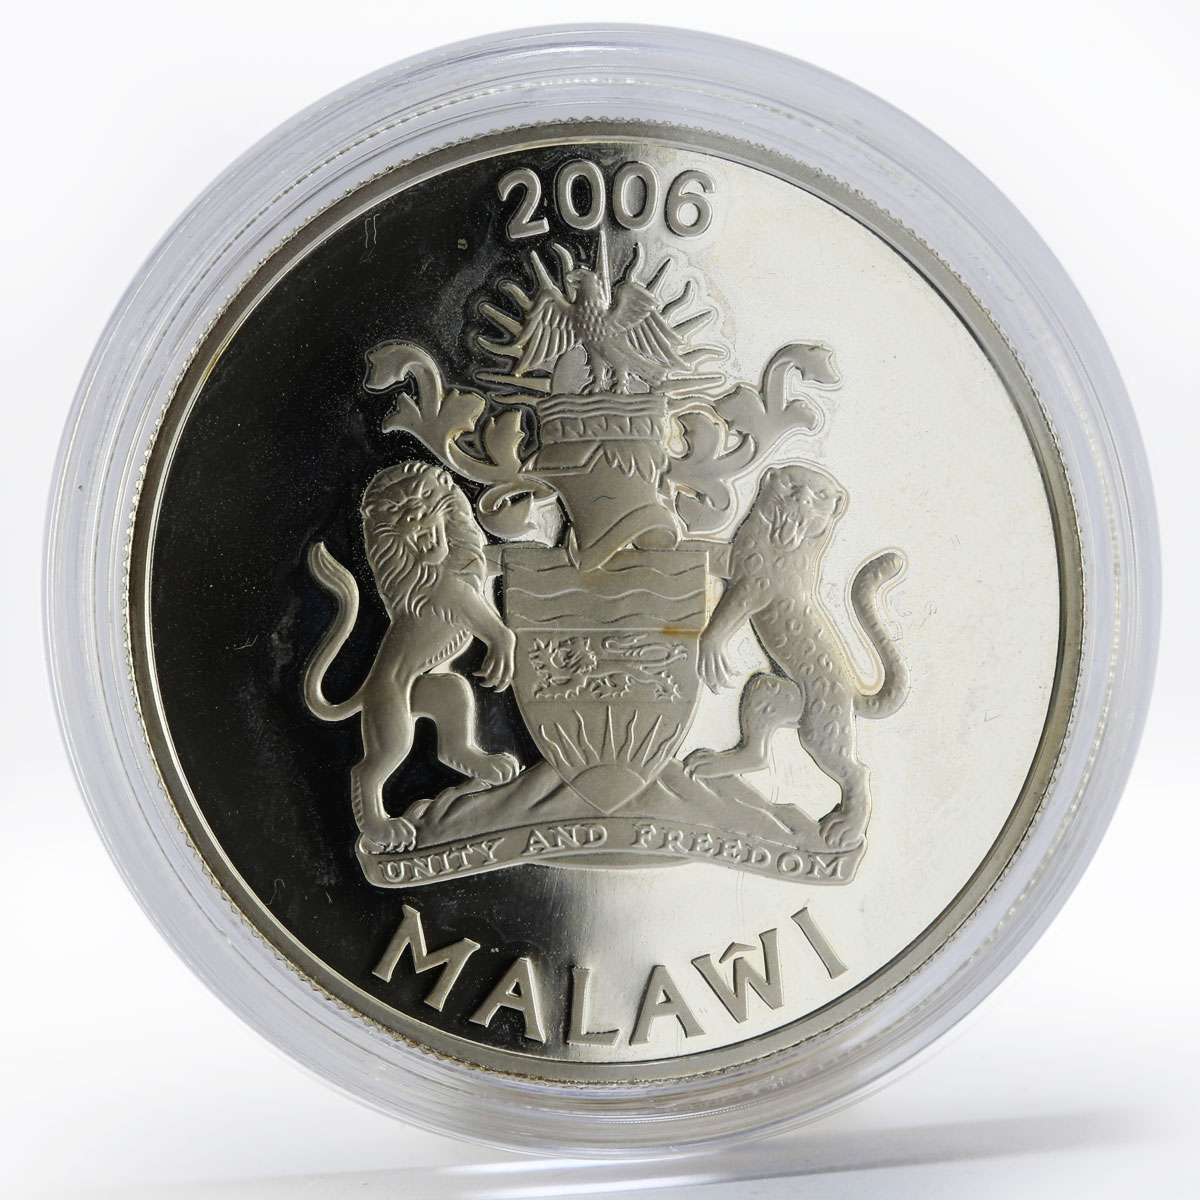 Malawi 5 Kwacha Lion Lioness Journey Through Africa silver proof coin 2006